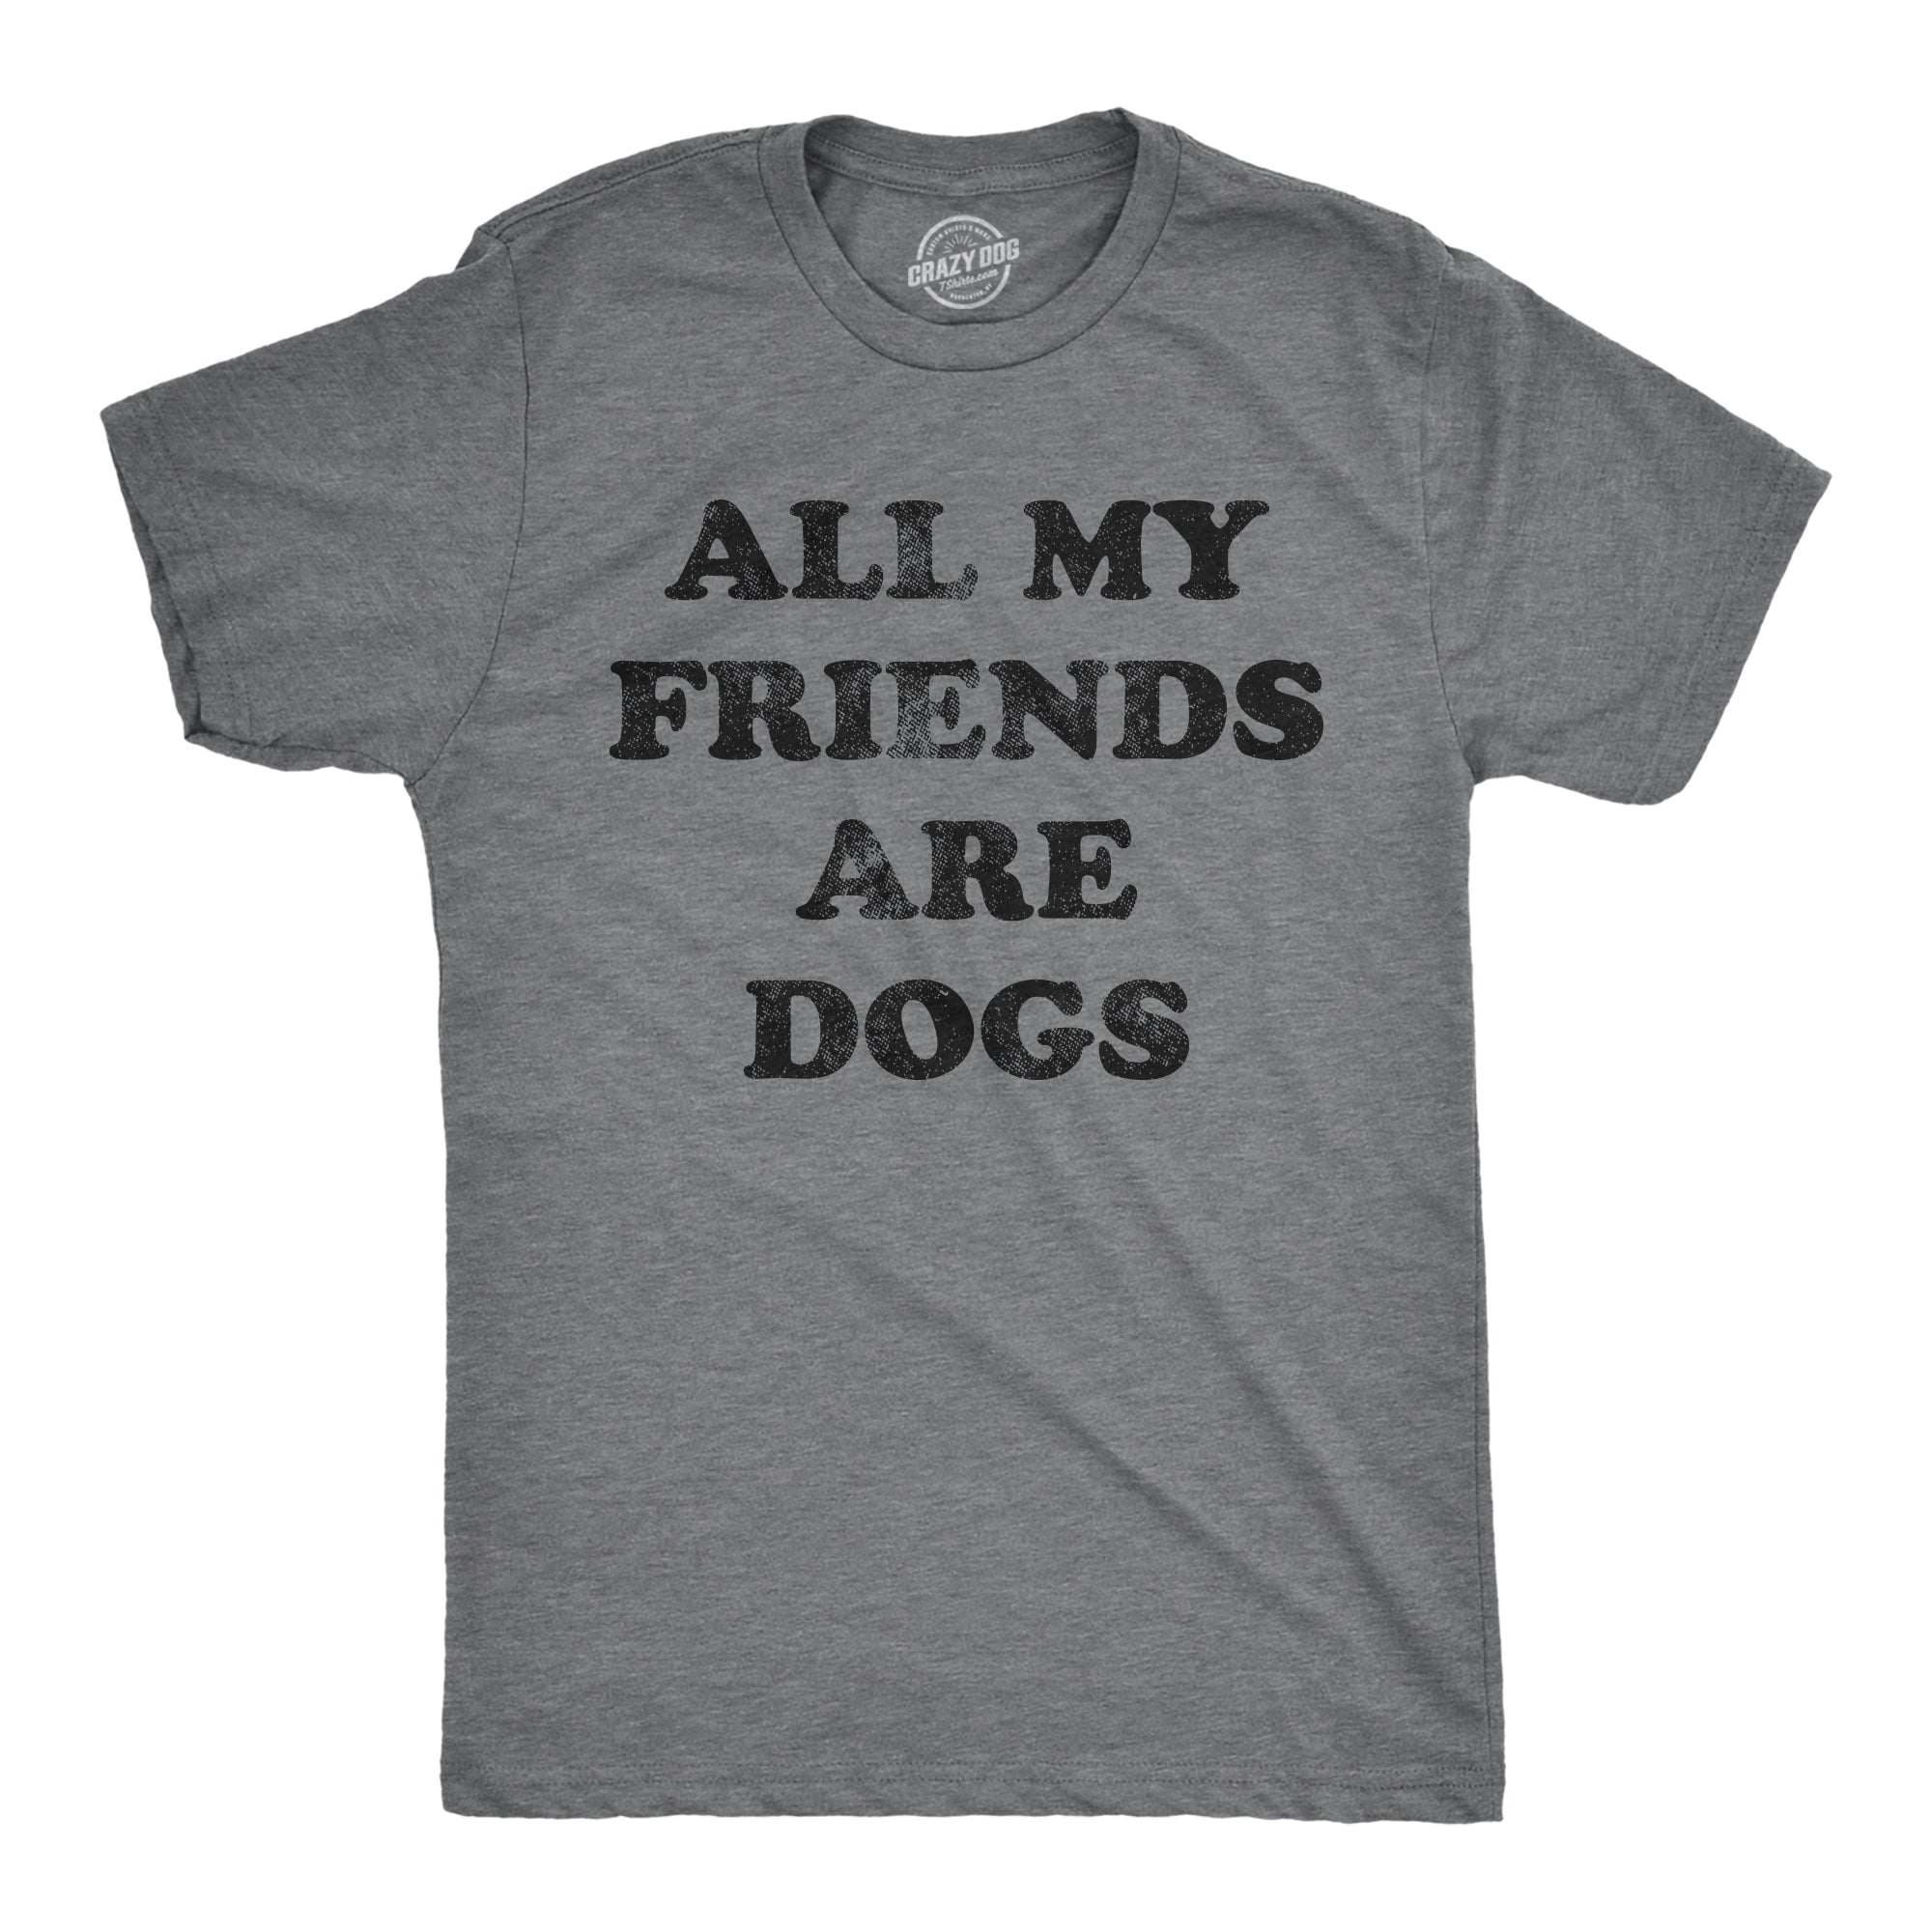 Funny Dark Heather Grey - FRIENDSDOGS All My Friends Are Dogs Mens T Shirt Nerdy Dog Introvert Tee